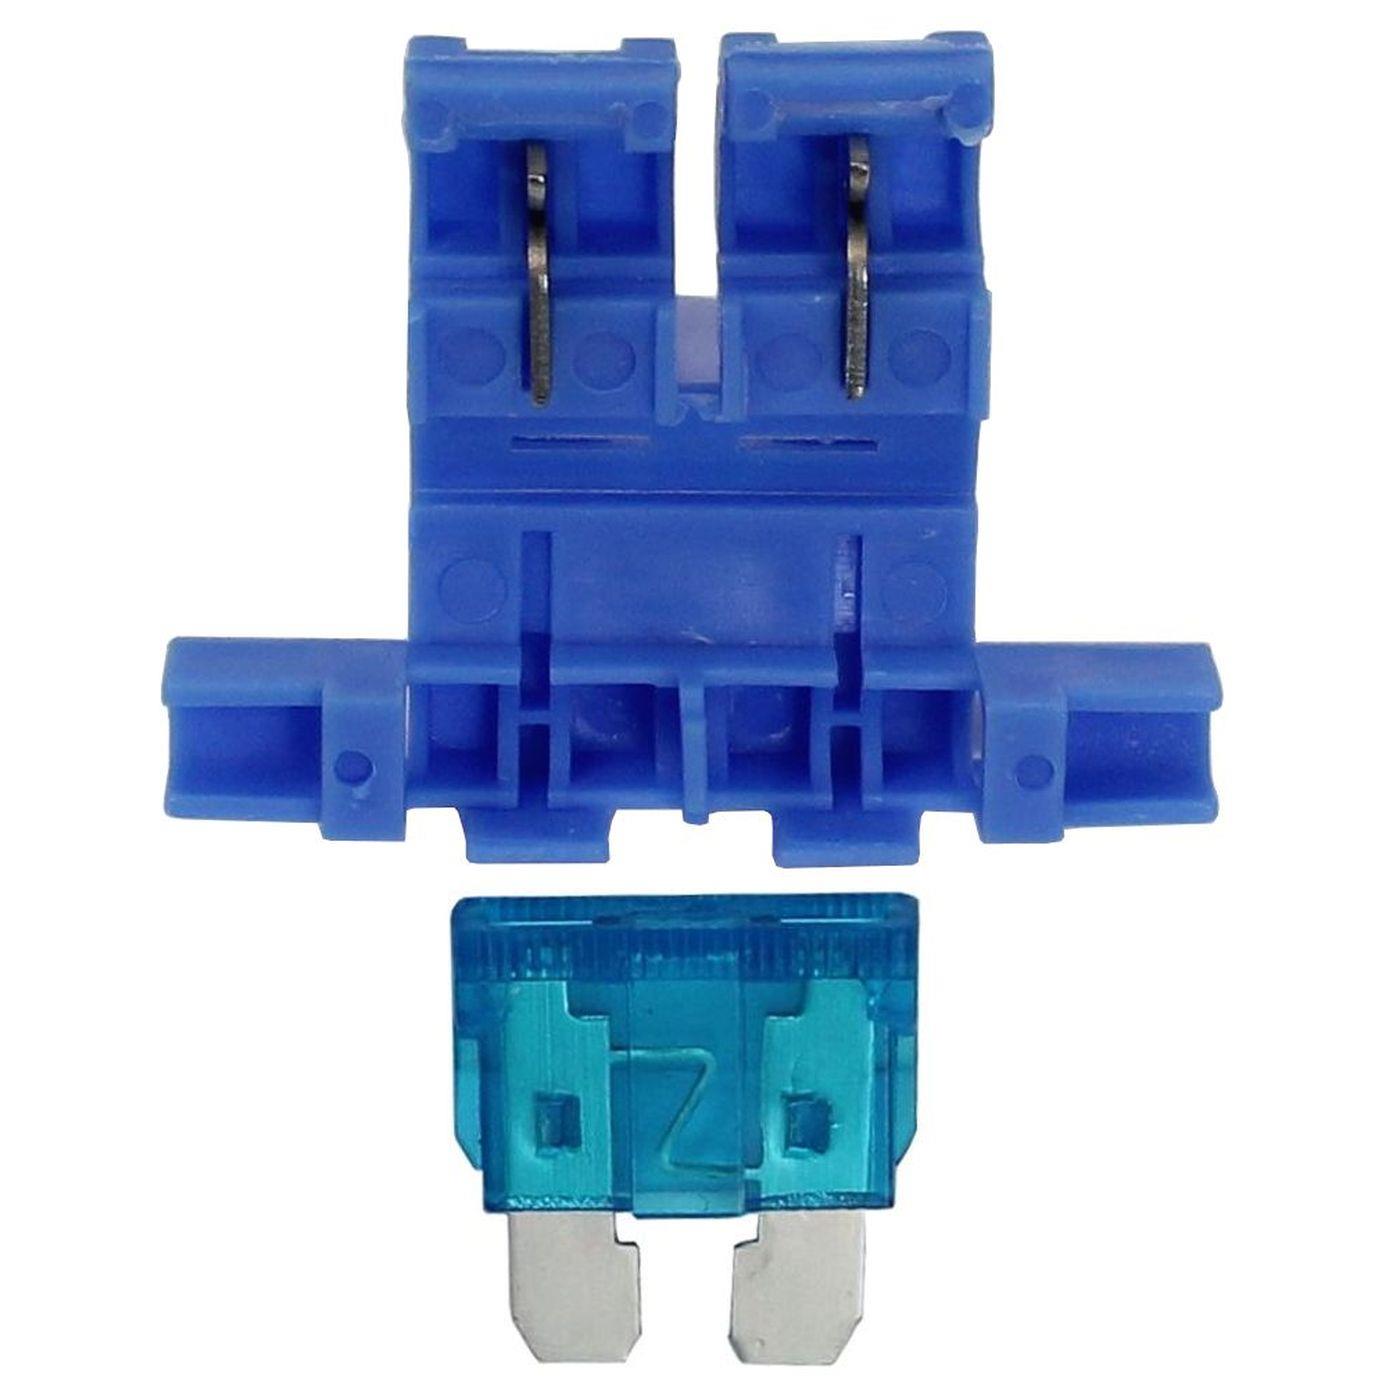 5x CAR Car Fuse holder 0,5...0,8mm² Cable cross section + 19mm 15A Flat fuse Insulation displacement technology